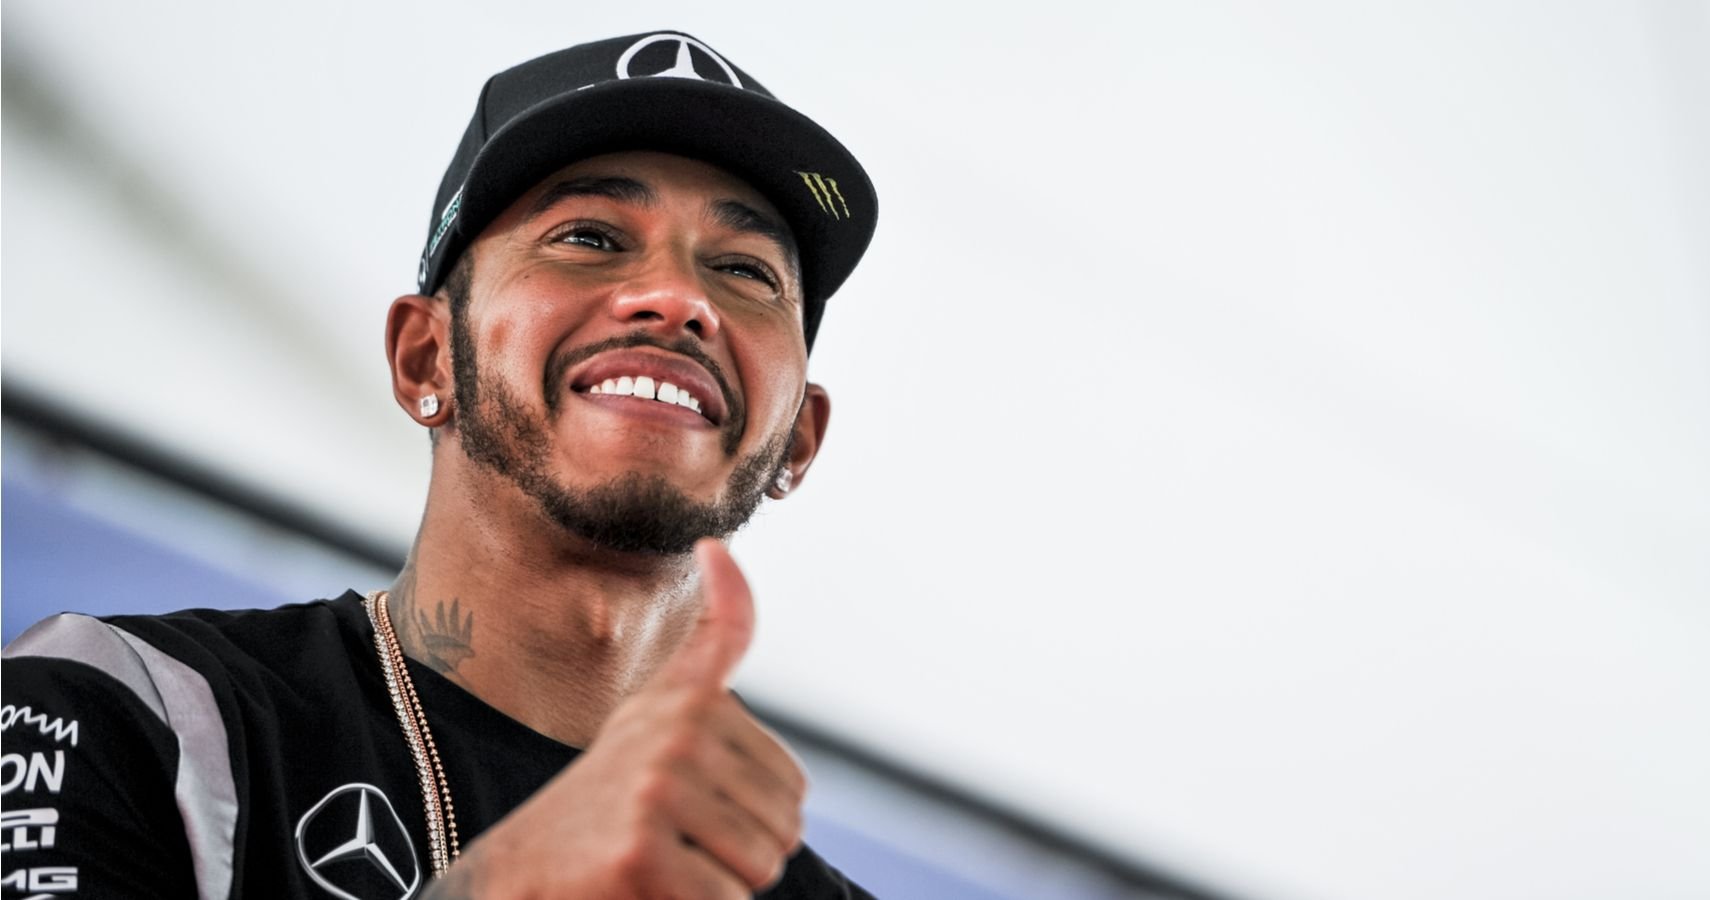 Inside The Seven-Time F1 Champion Lewis Hamilton's Watch Collection